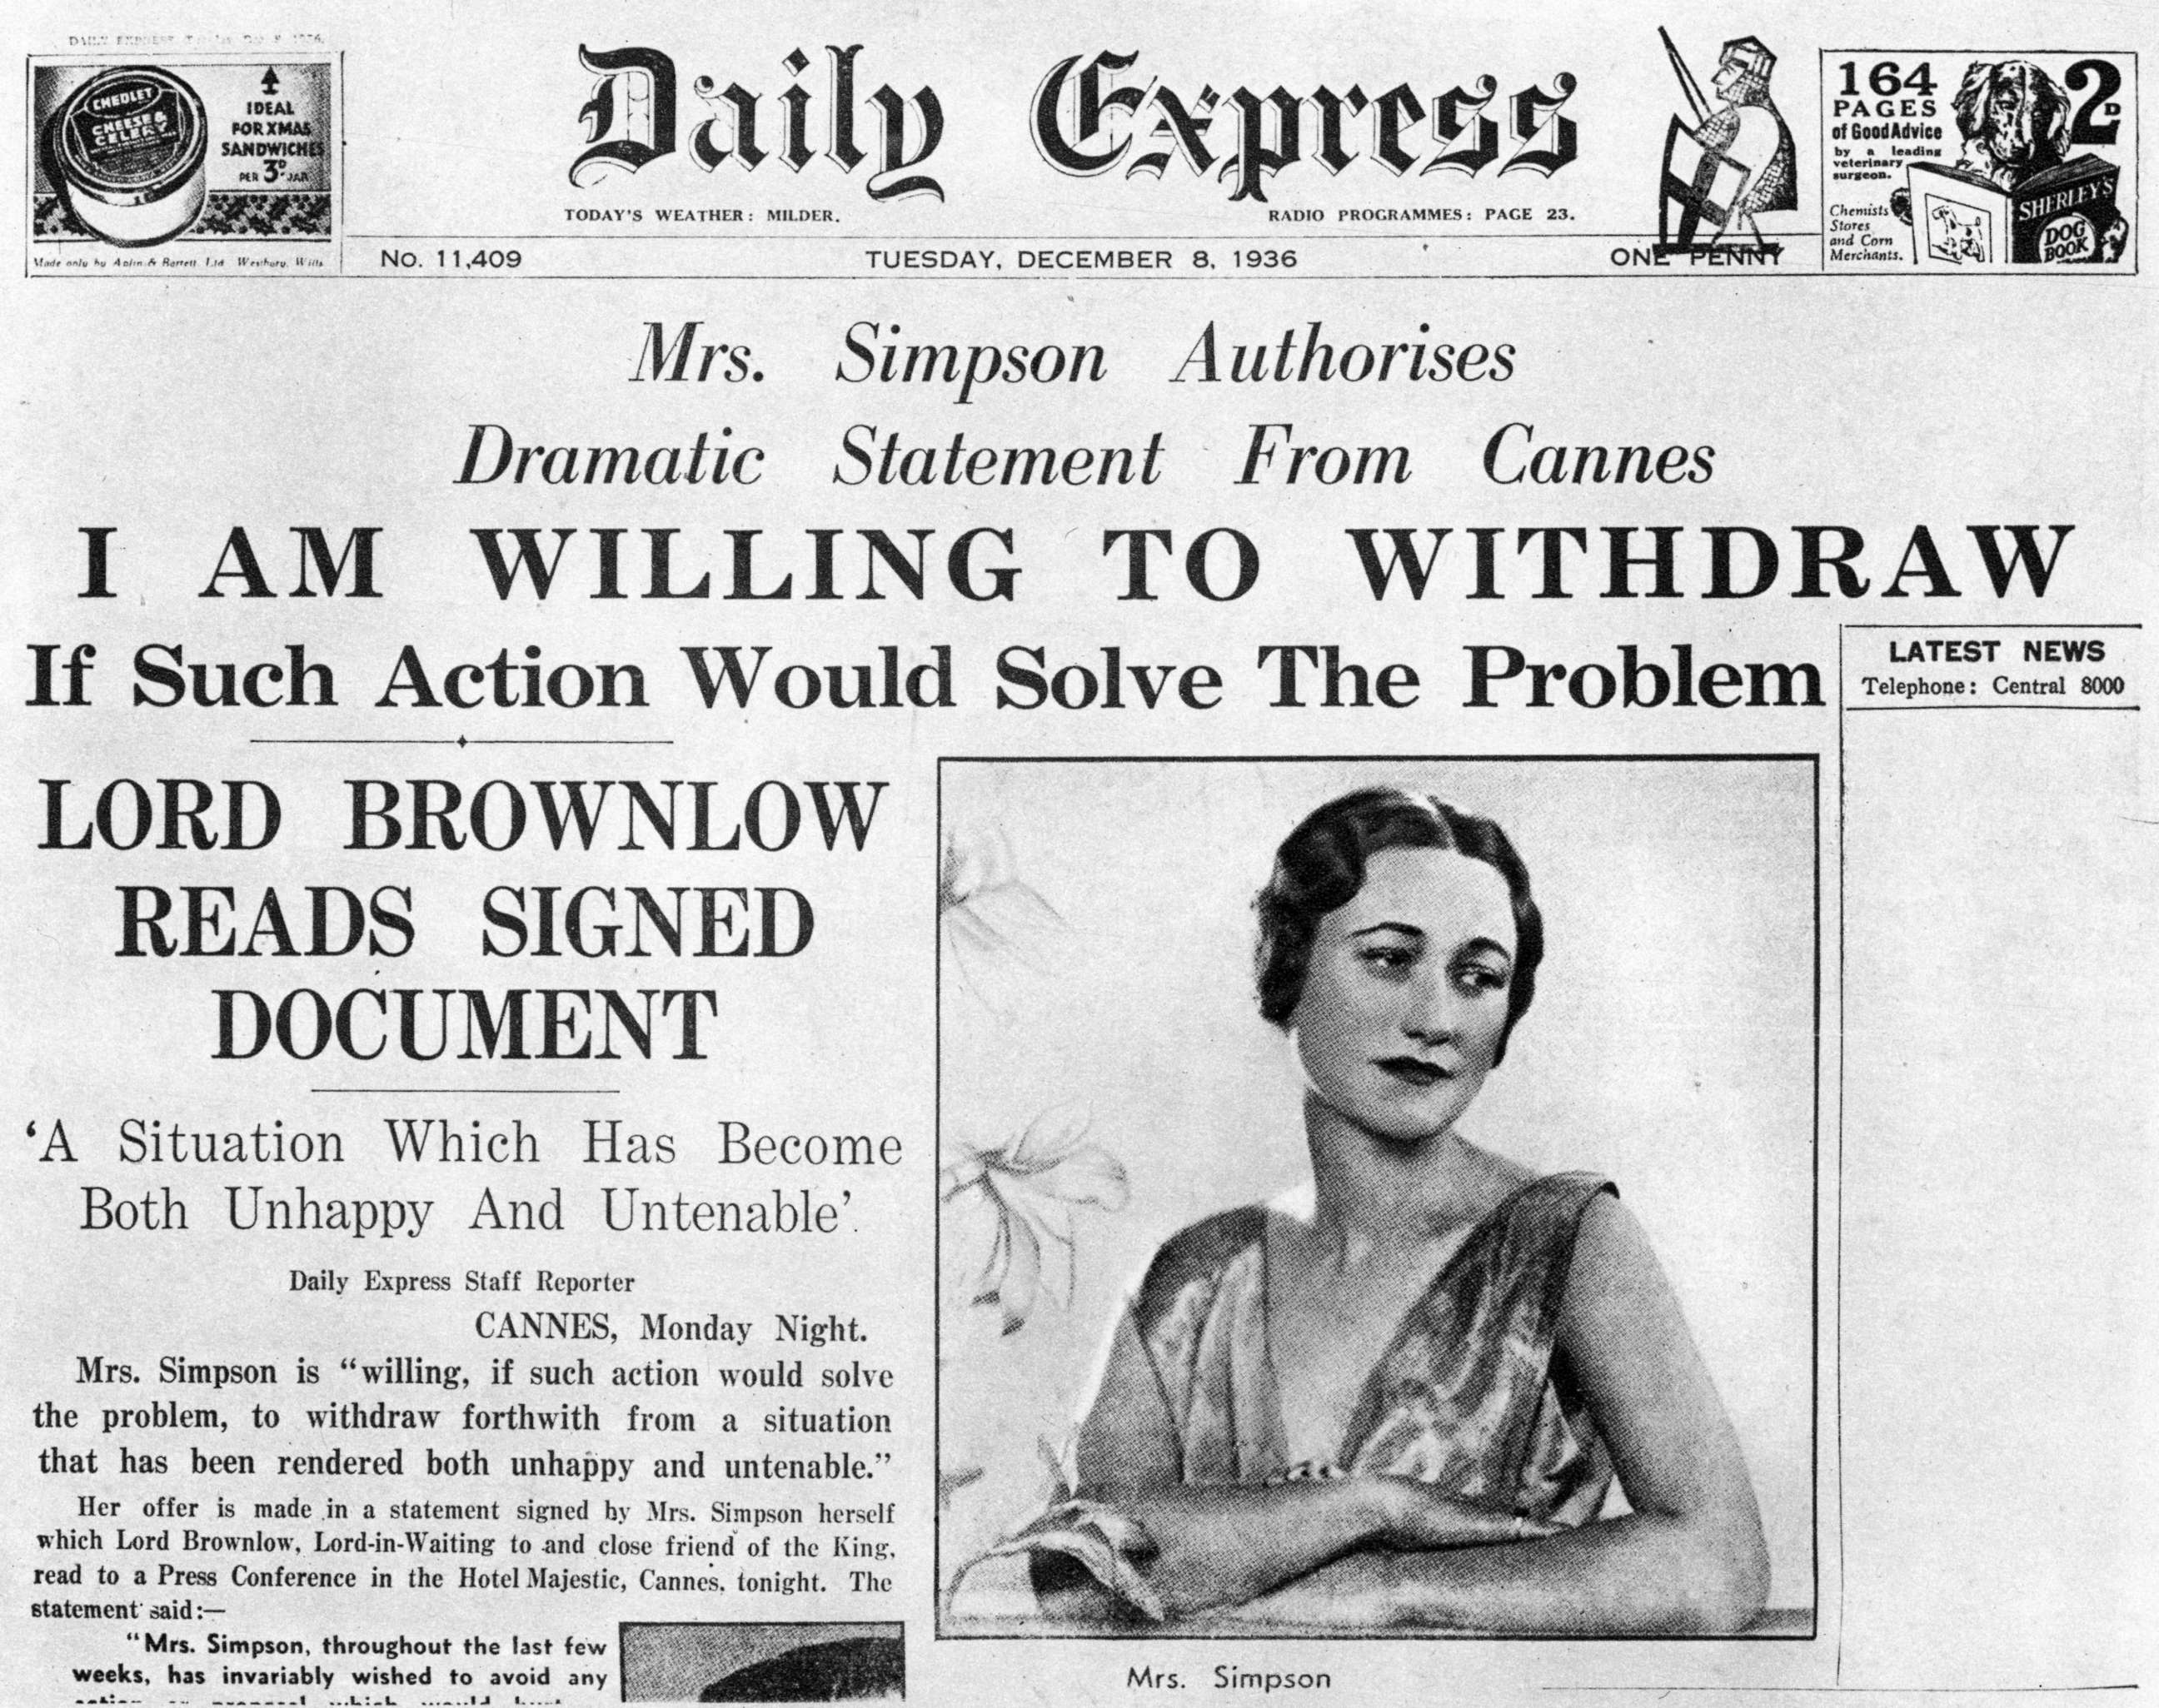 PHOTO: Wallis Simpson is pictured on the front page of the "Daily Express" newspaper on Dec. 8, 1936.